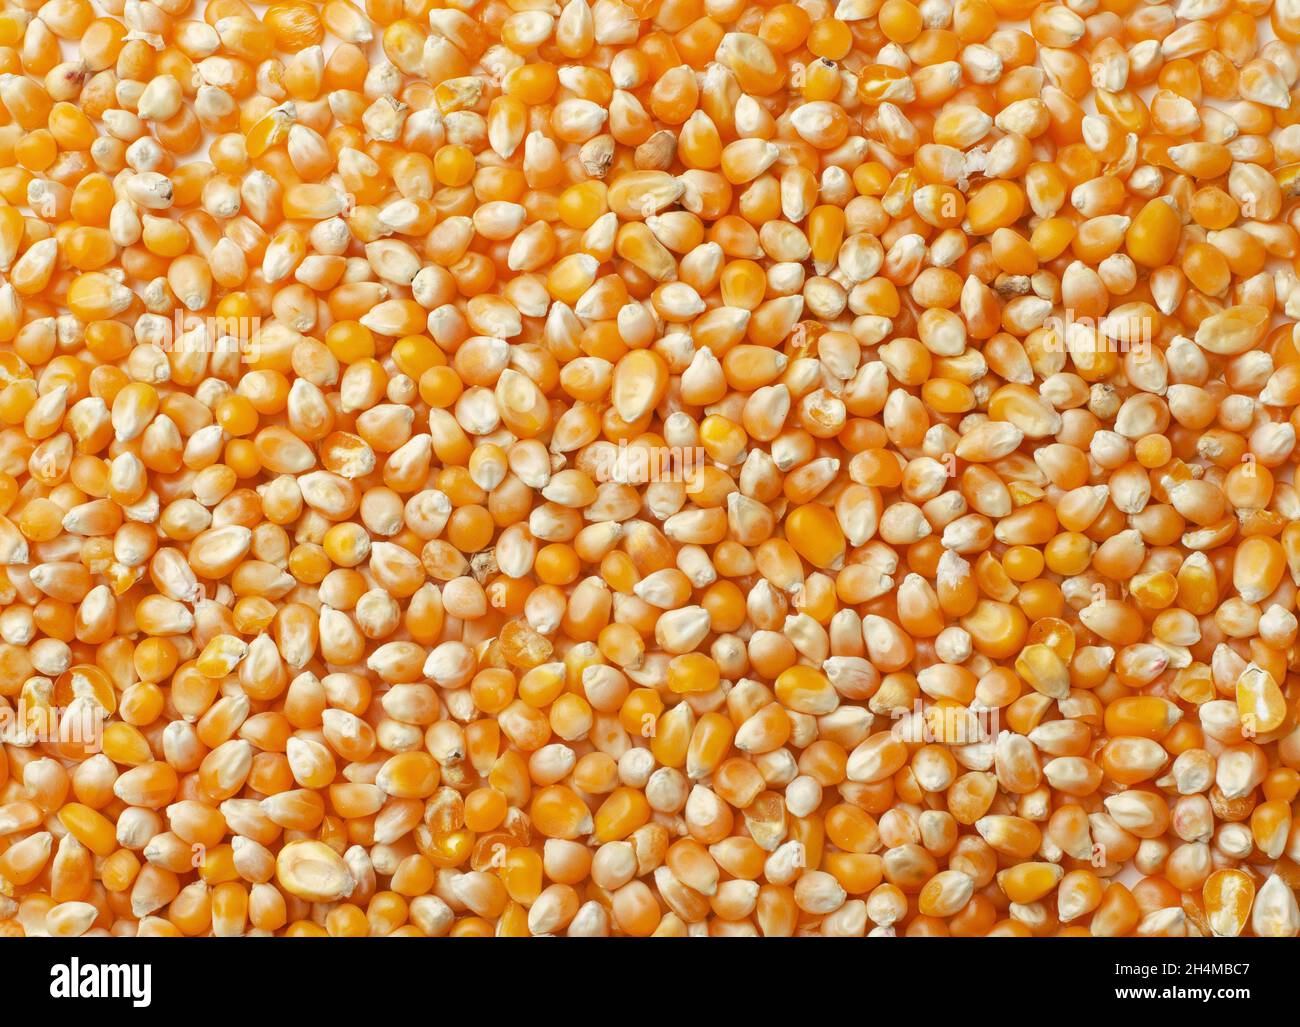 Corn grains background or texture Stock Photo